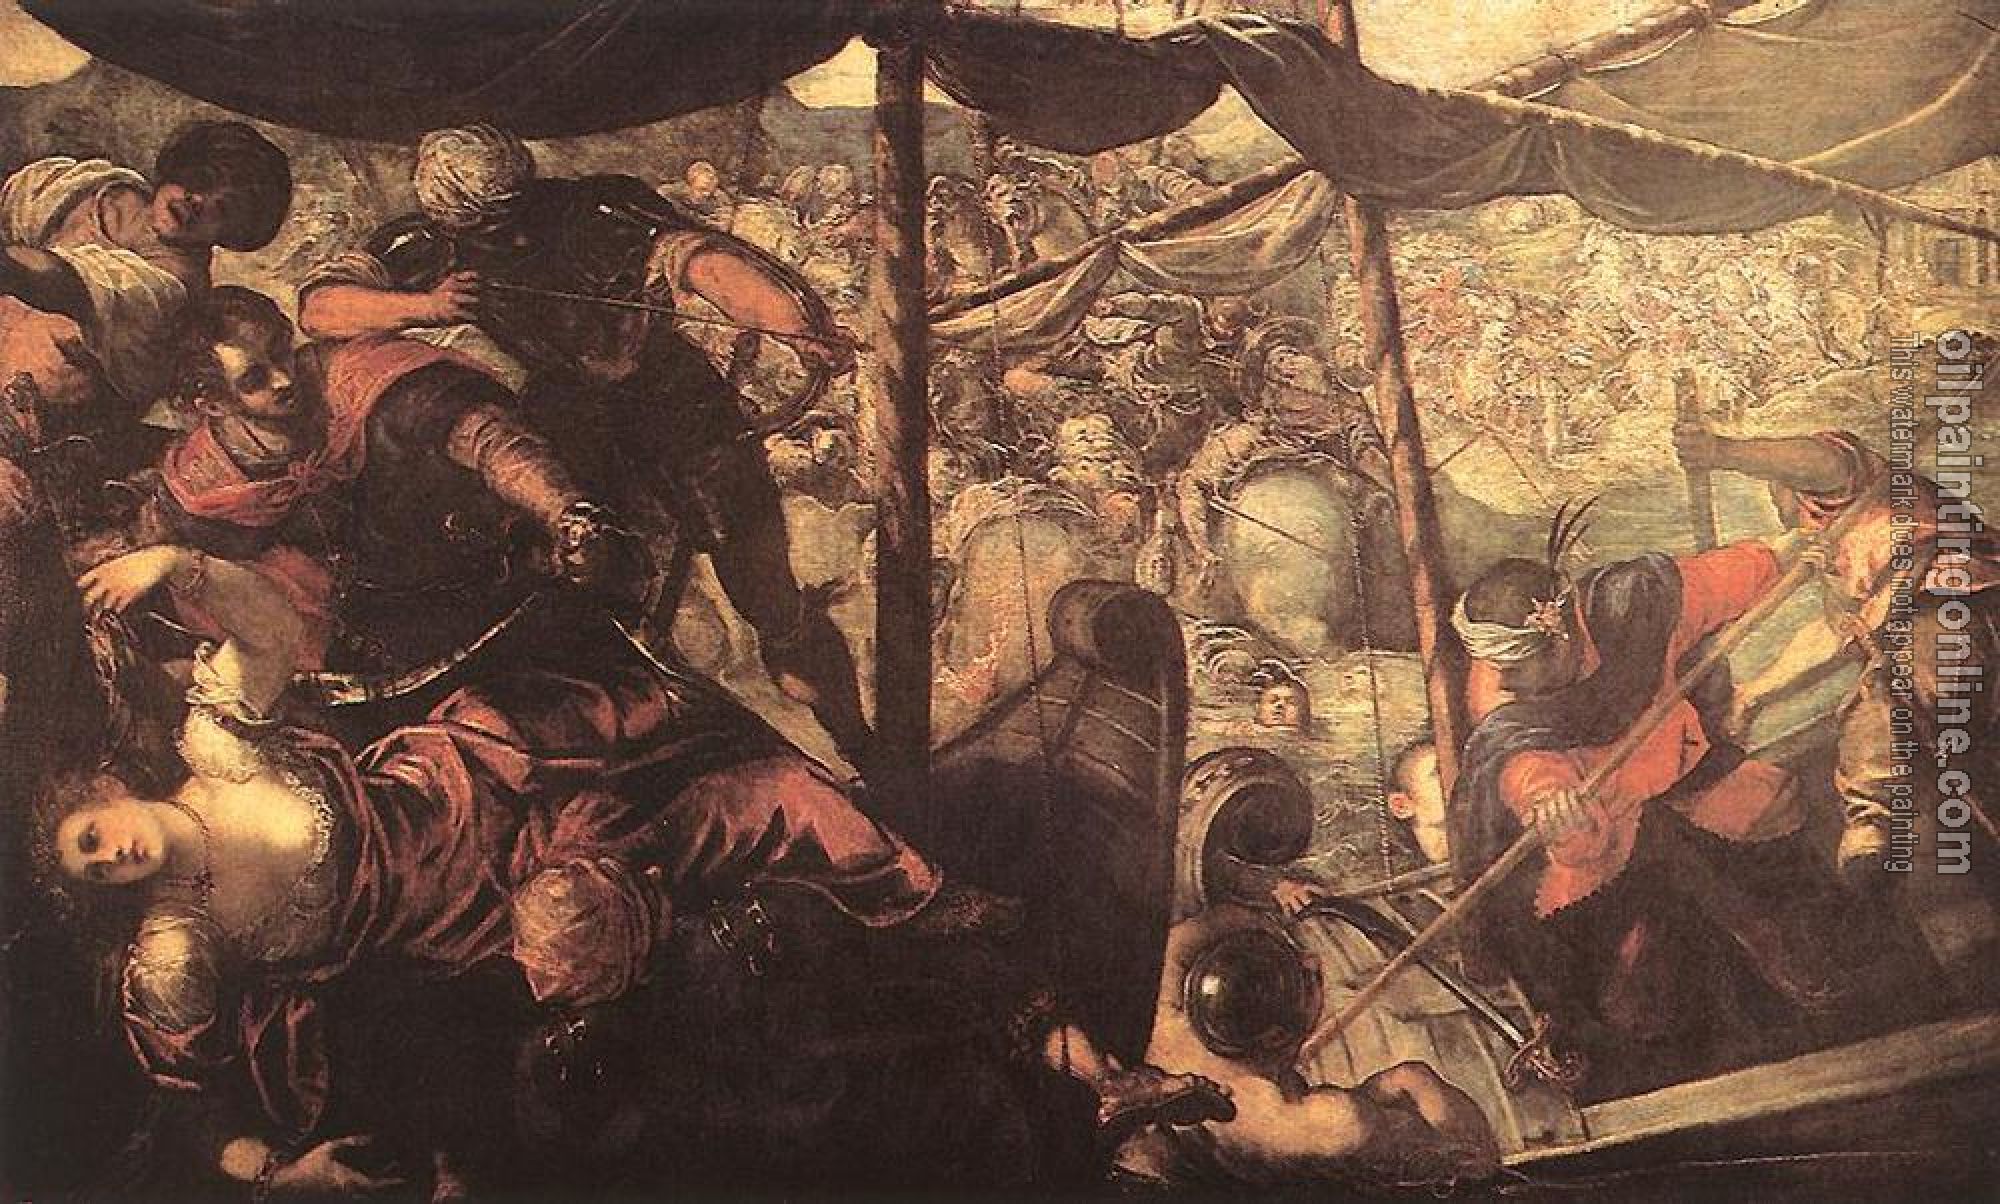 Jacopo Robusti Tintoretto - Battle between Turks and Christians